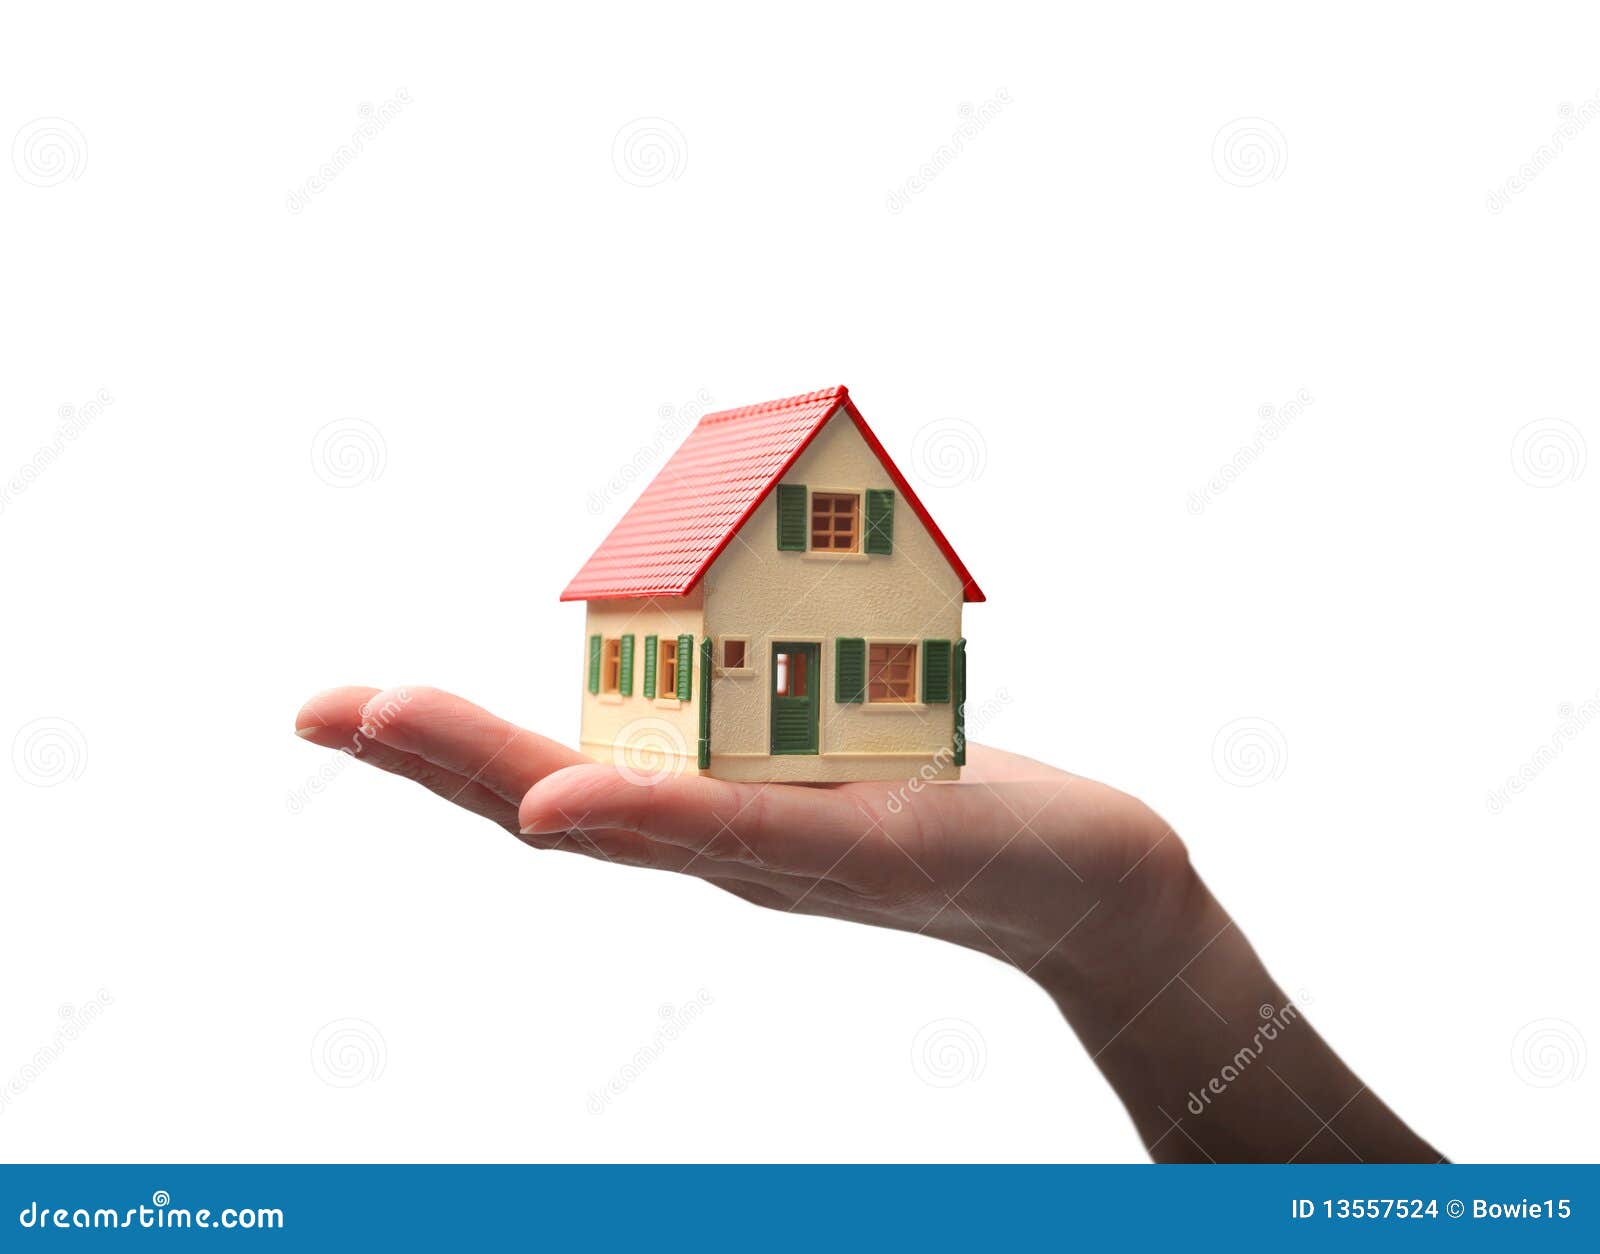 Property stock photo. Image of white, home, little, mortgage - 13557524